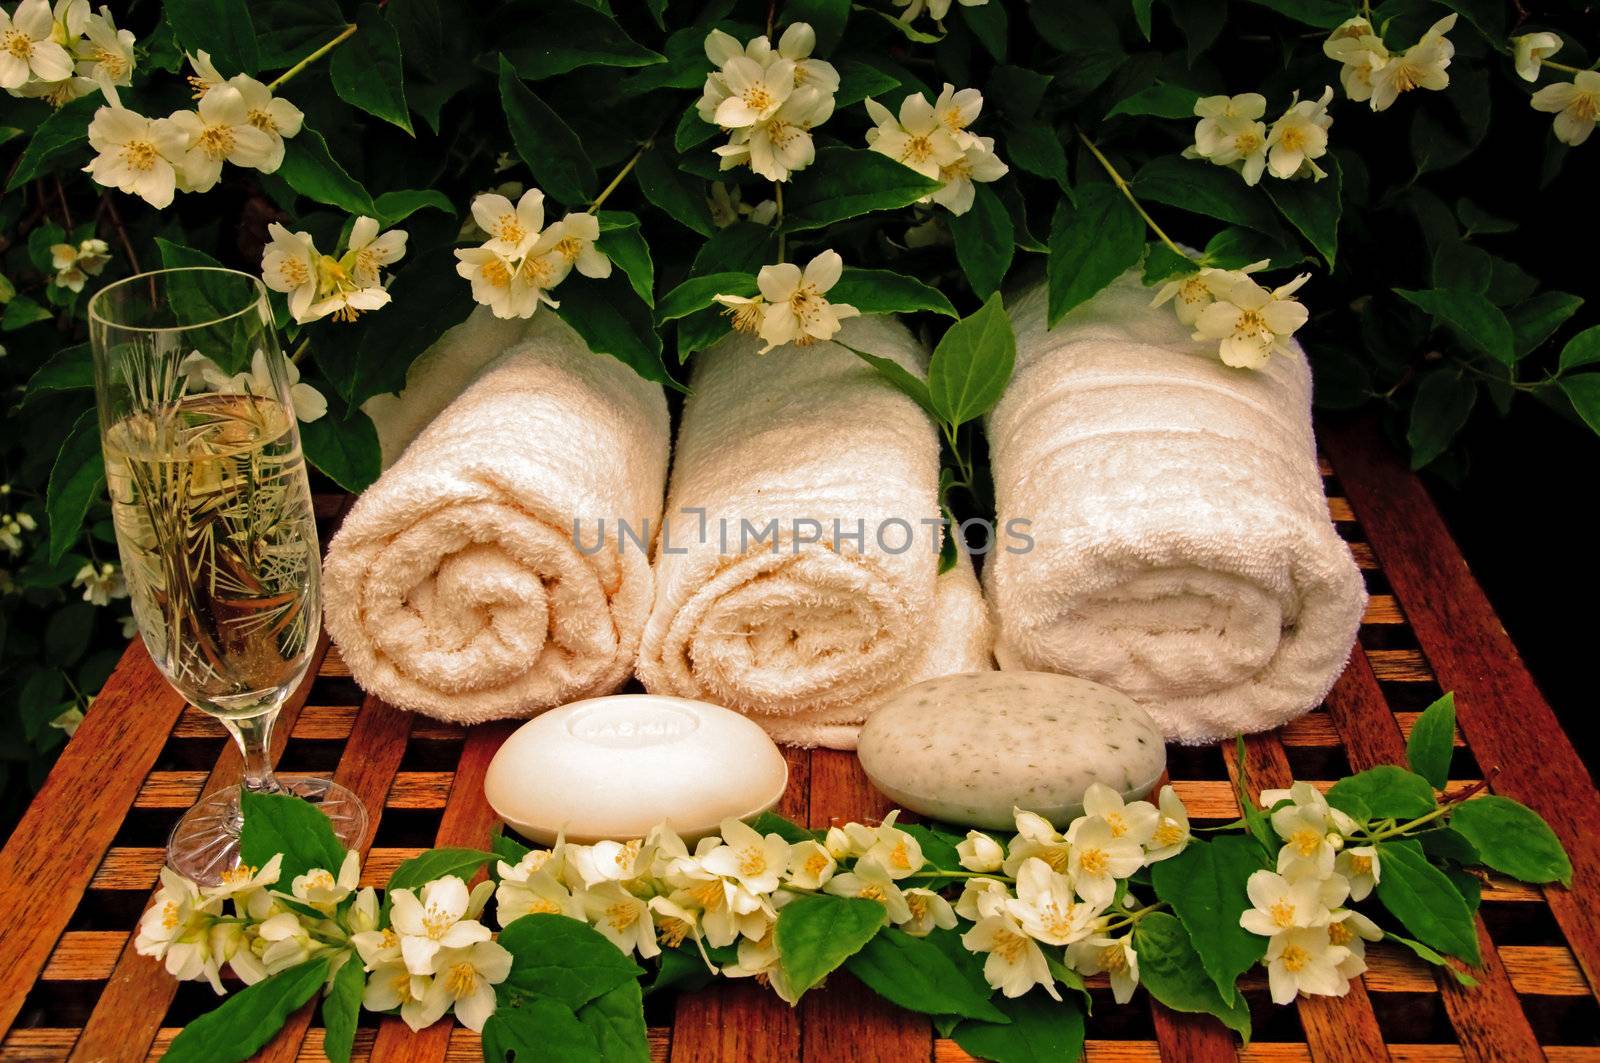 Towels, soap, flowers and a glass of white vine on a table